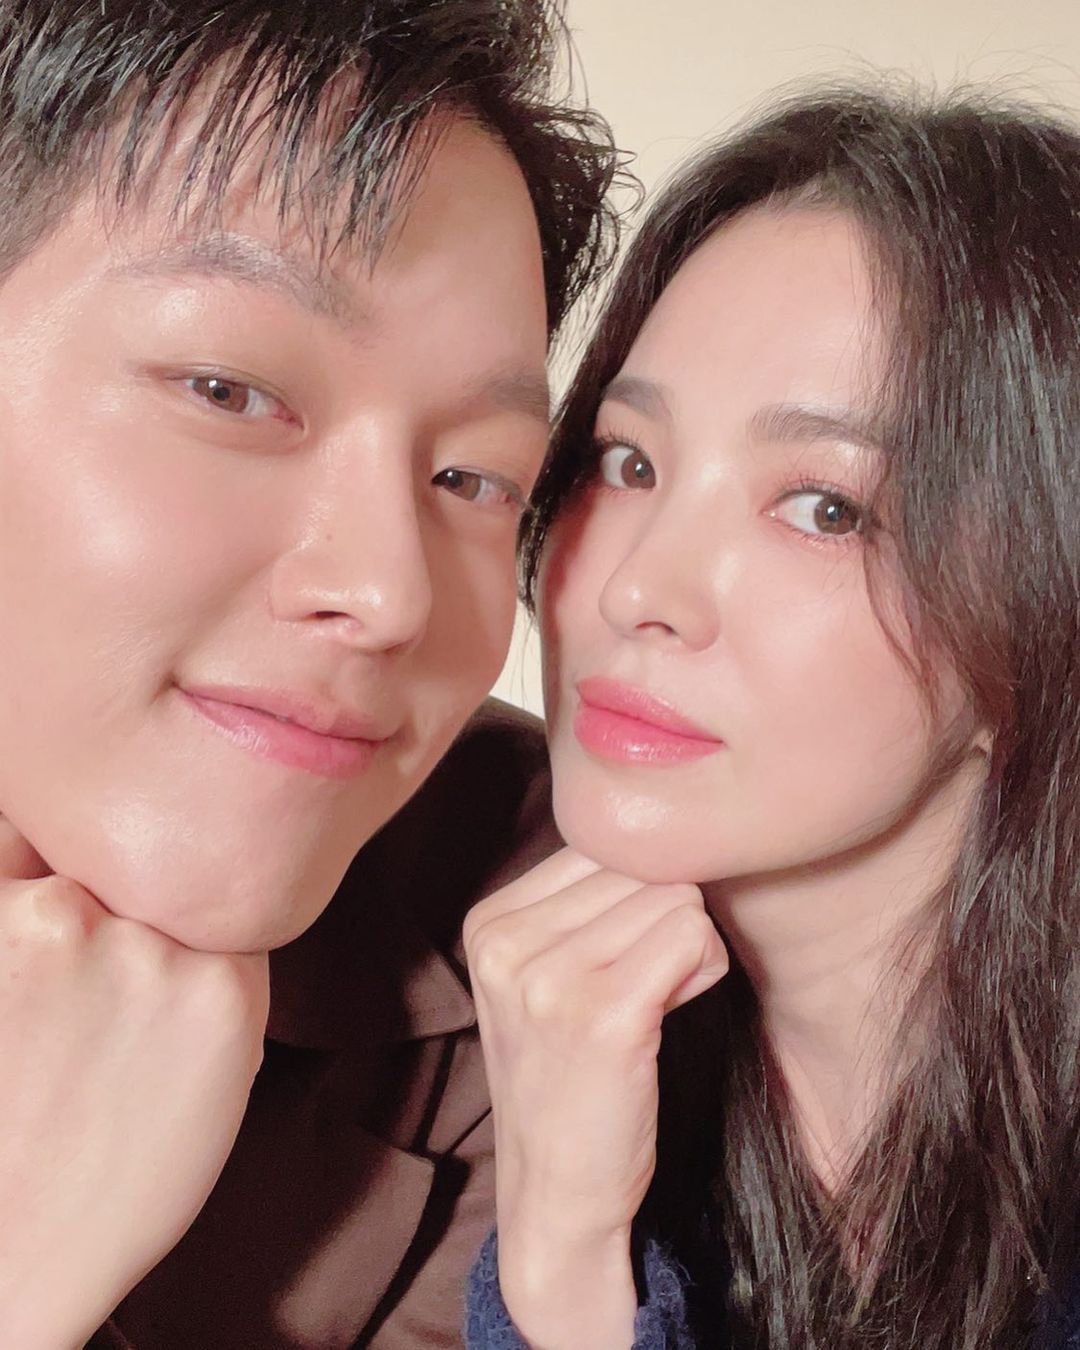 Song Hye Kyo and Jang Ki Yong Reveal Selfie Together After Successful Now, We Are Breaking Up Premiere + Drama Achieves New Impressive Ratings KDramaStars image